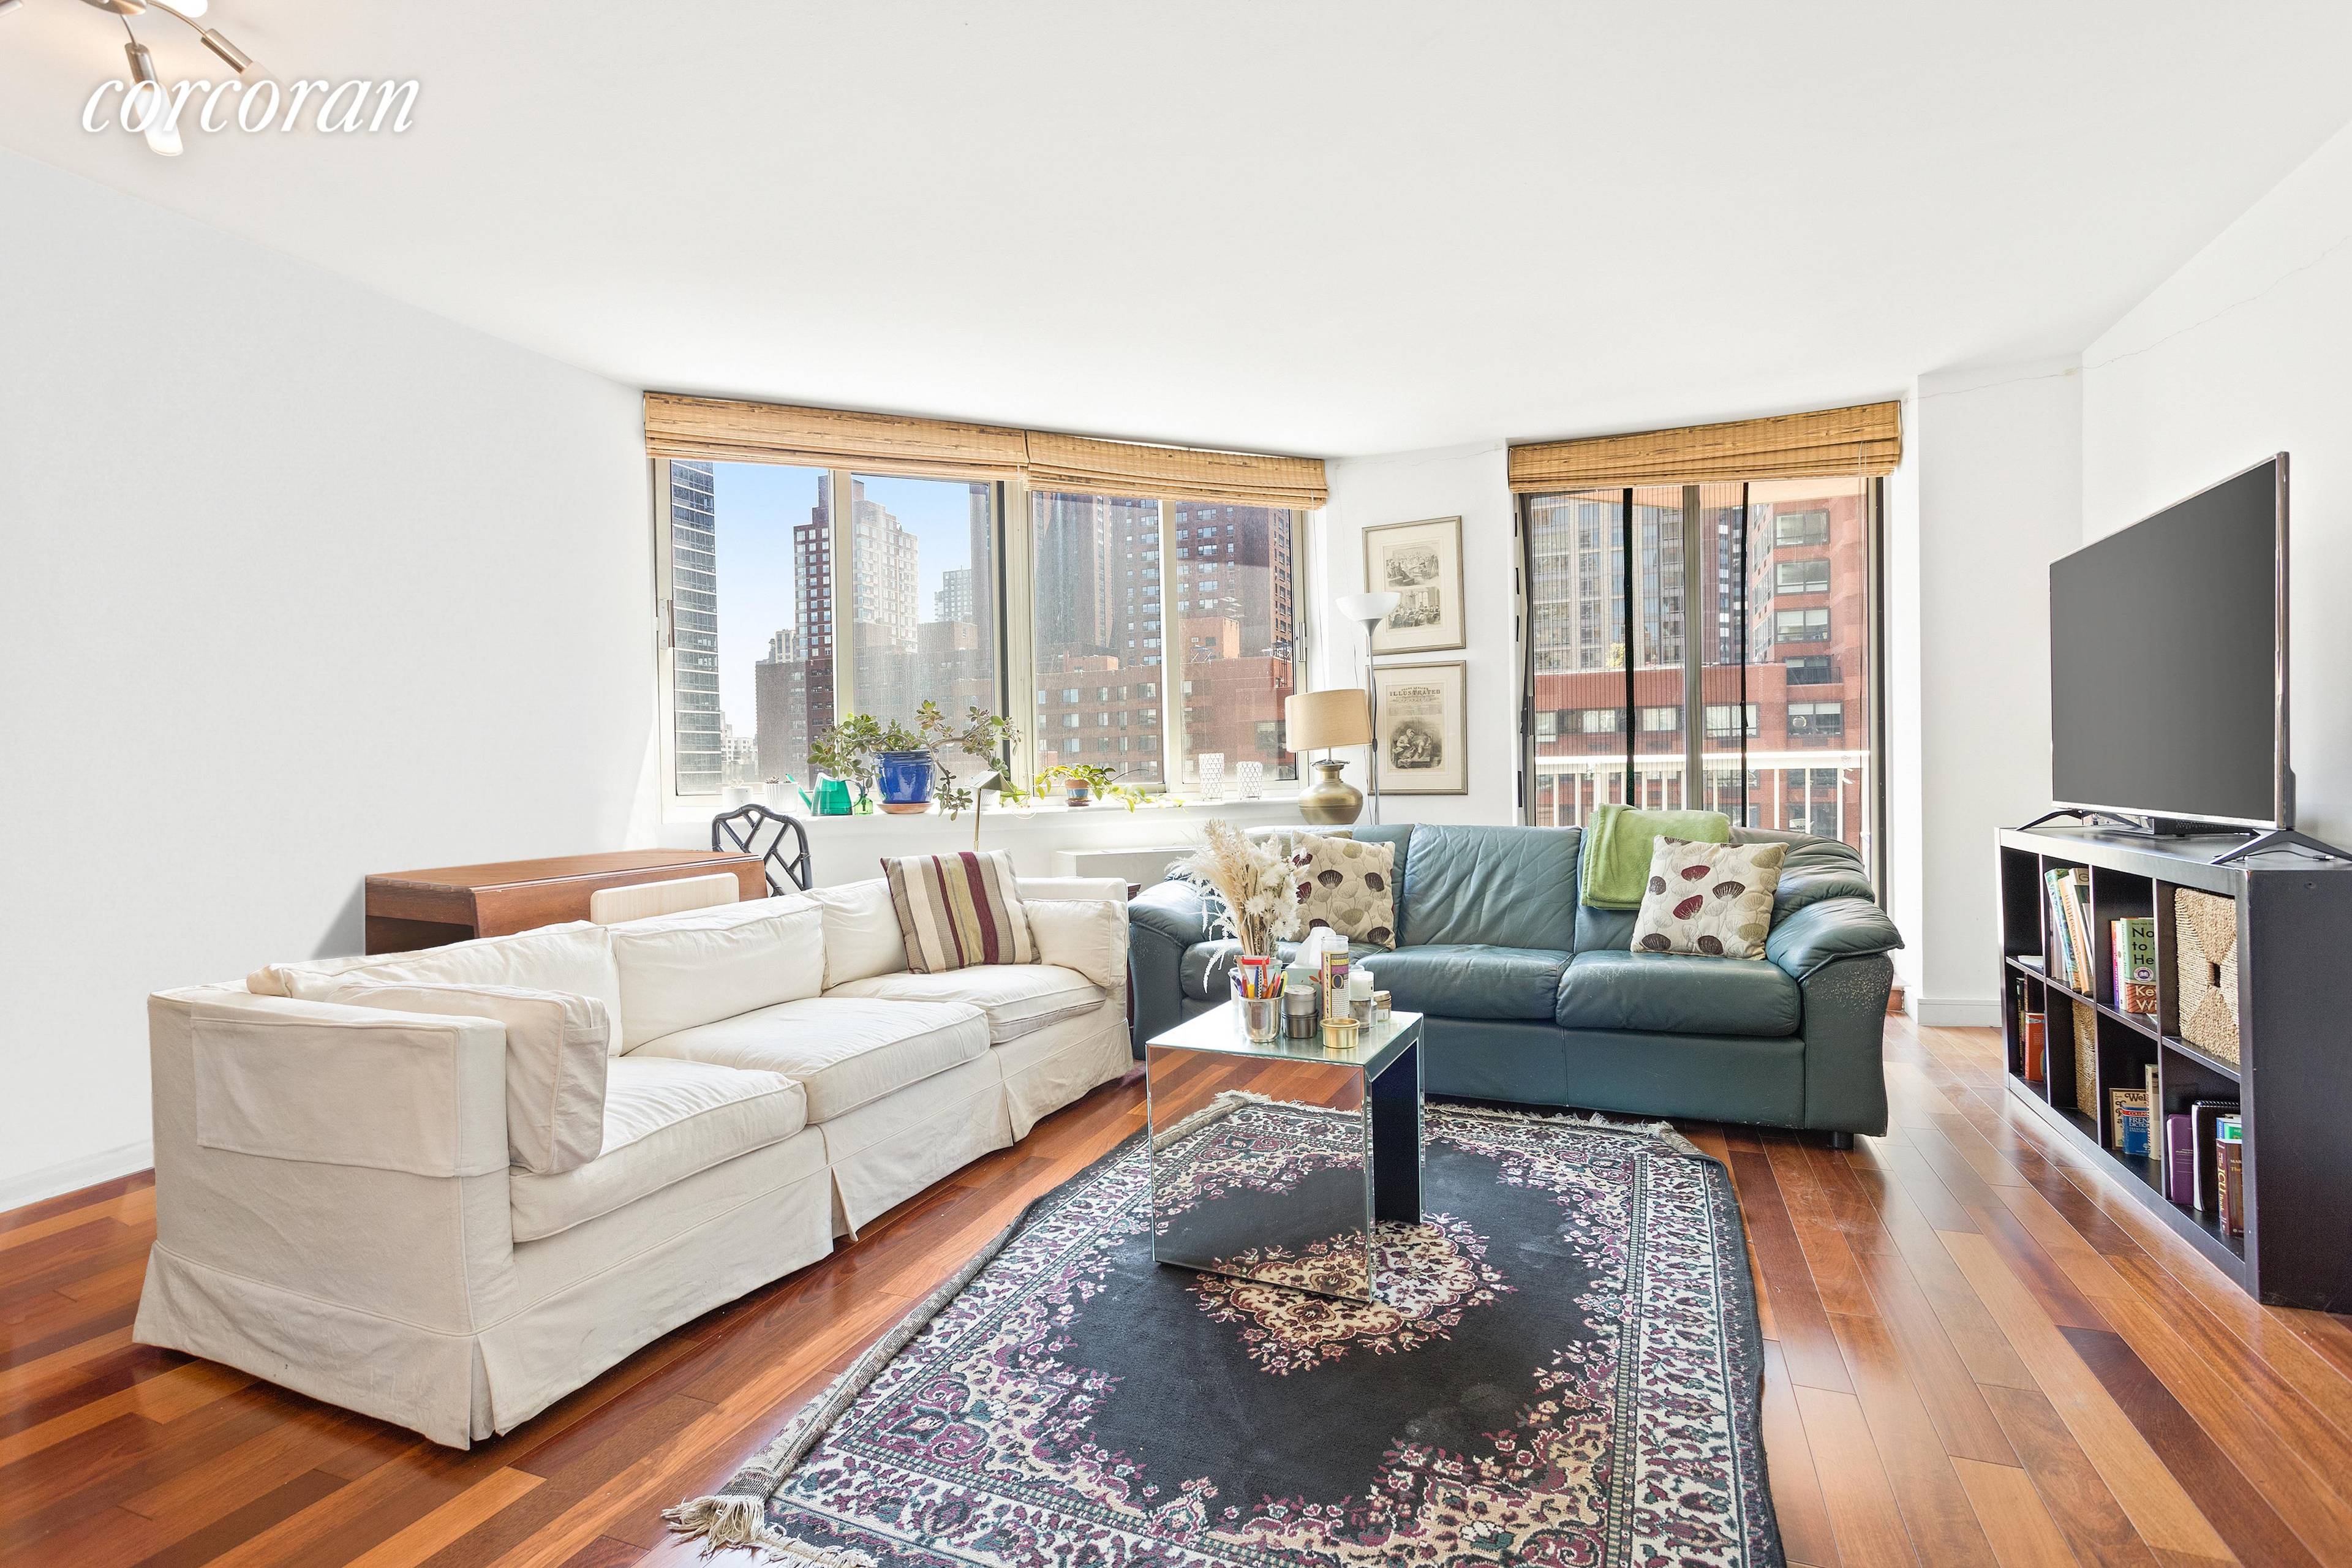 Gorgeous, bright and spacious 2 bedroom, 2 bathroom, 2 balcony, apartment on 95th between 2nd and 3rd avenue.